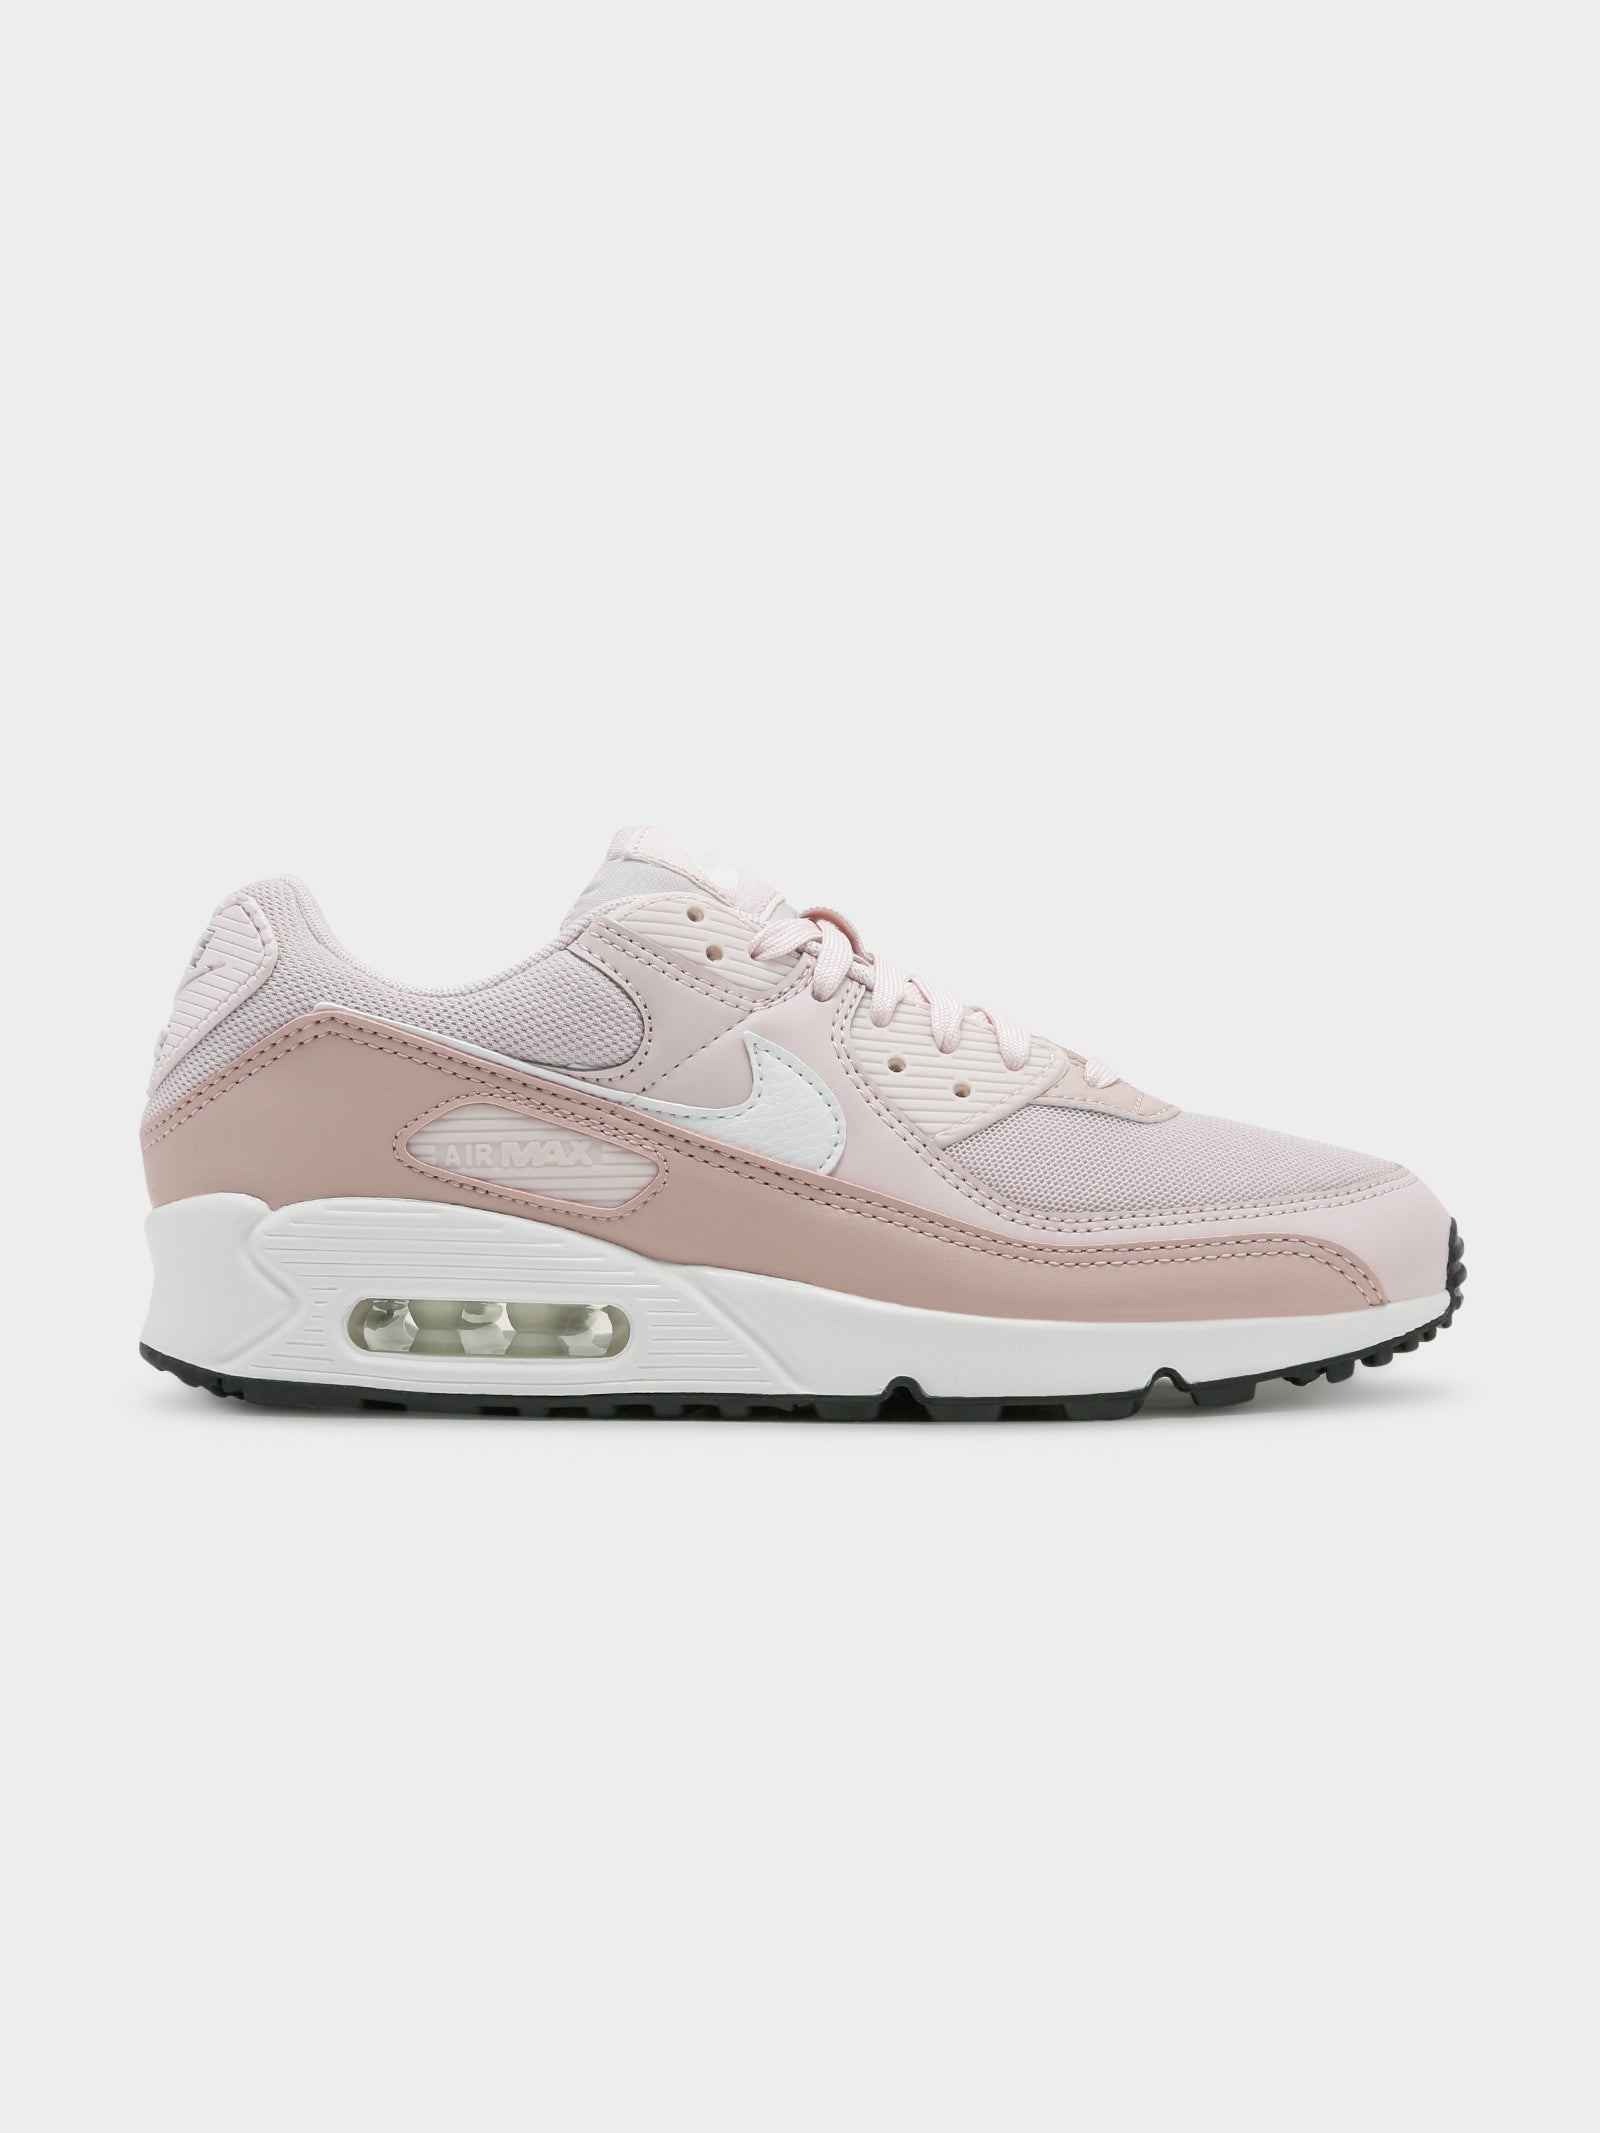 Womens Air Max 90 Sneakers in Pink & White - Glue Store